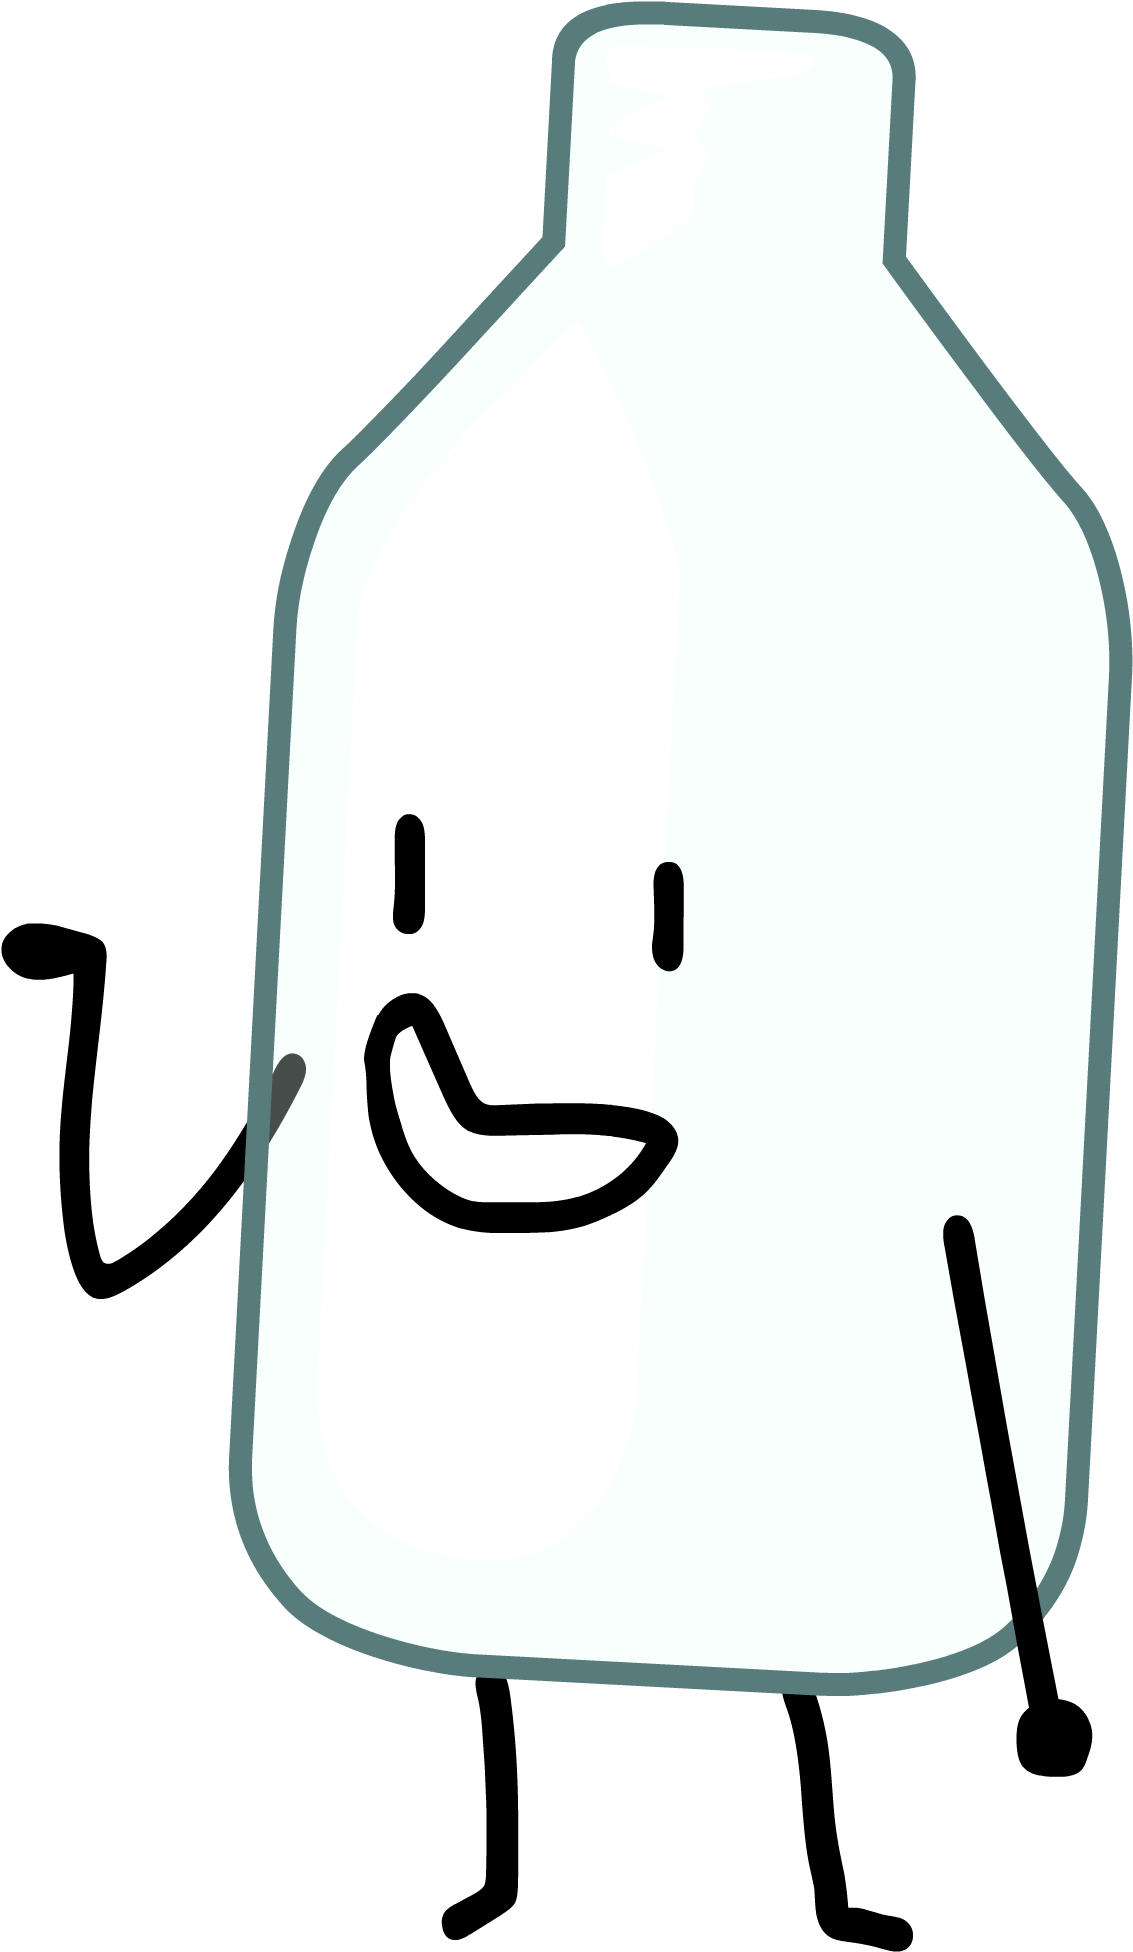 I'm So Excited To Start Preventing Death - Battle For Bfdi Bottle (1189x2013)